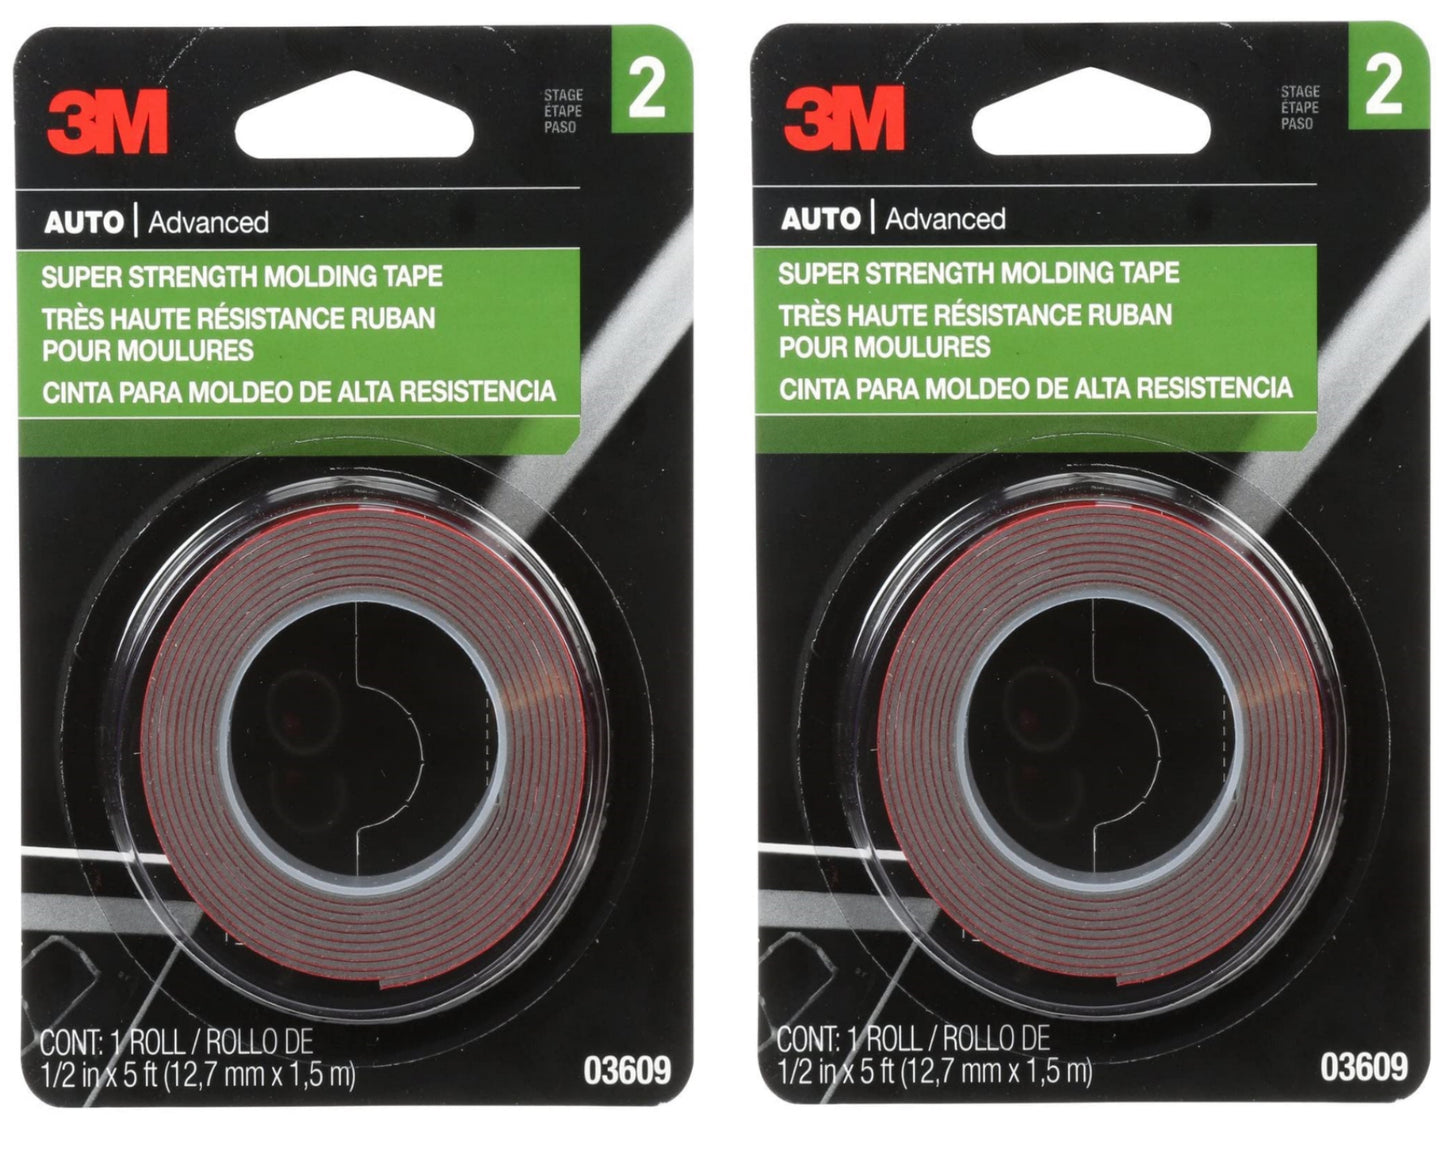 3M Super Strength Molding Tape, 03609, 1/2 in x 5 ft Resists moisture, UV and Solvents - Pack of 2